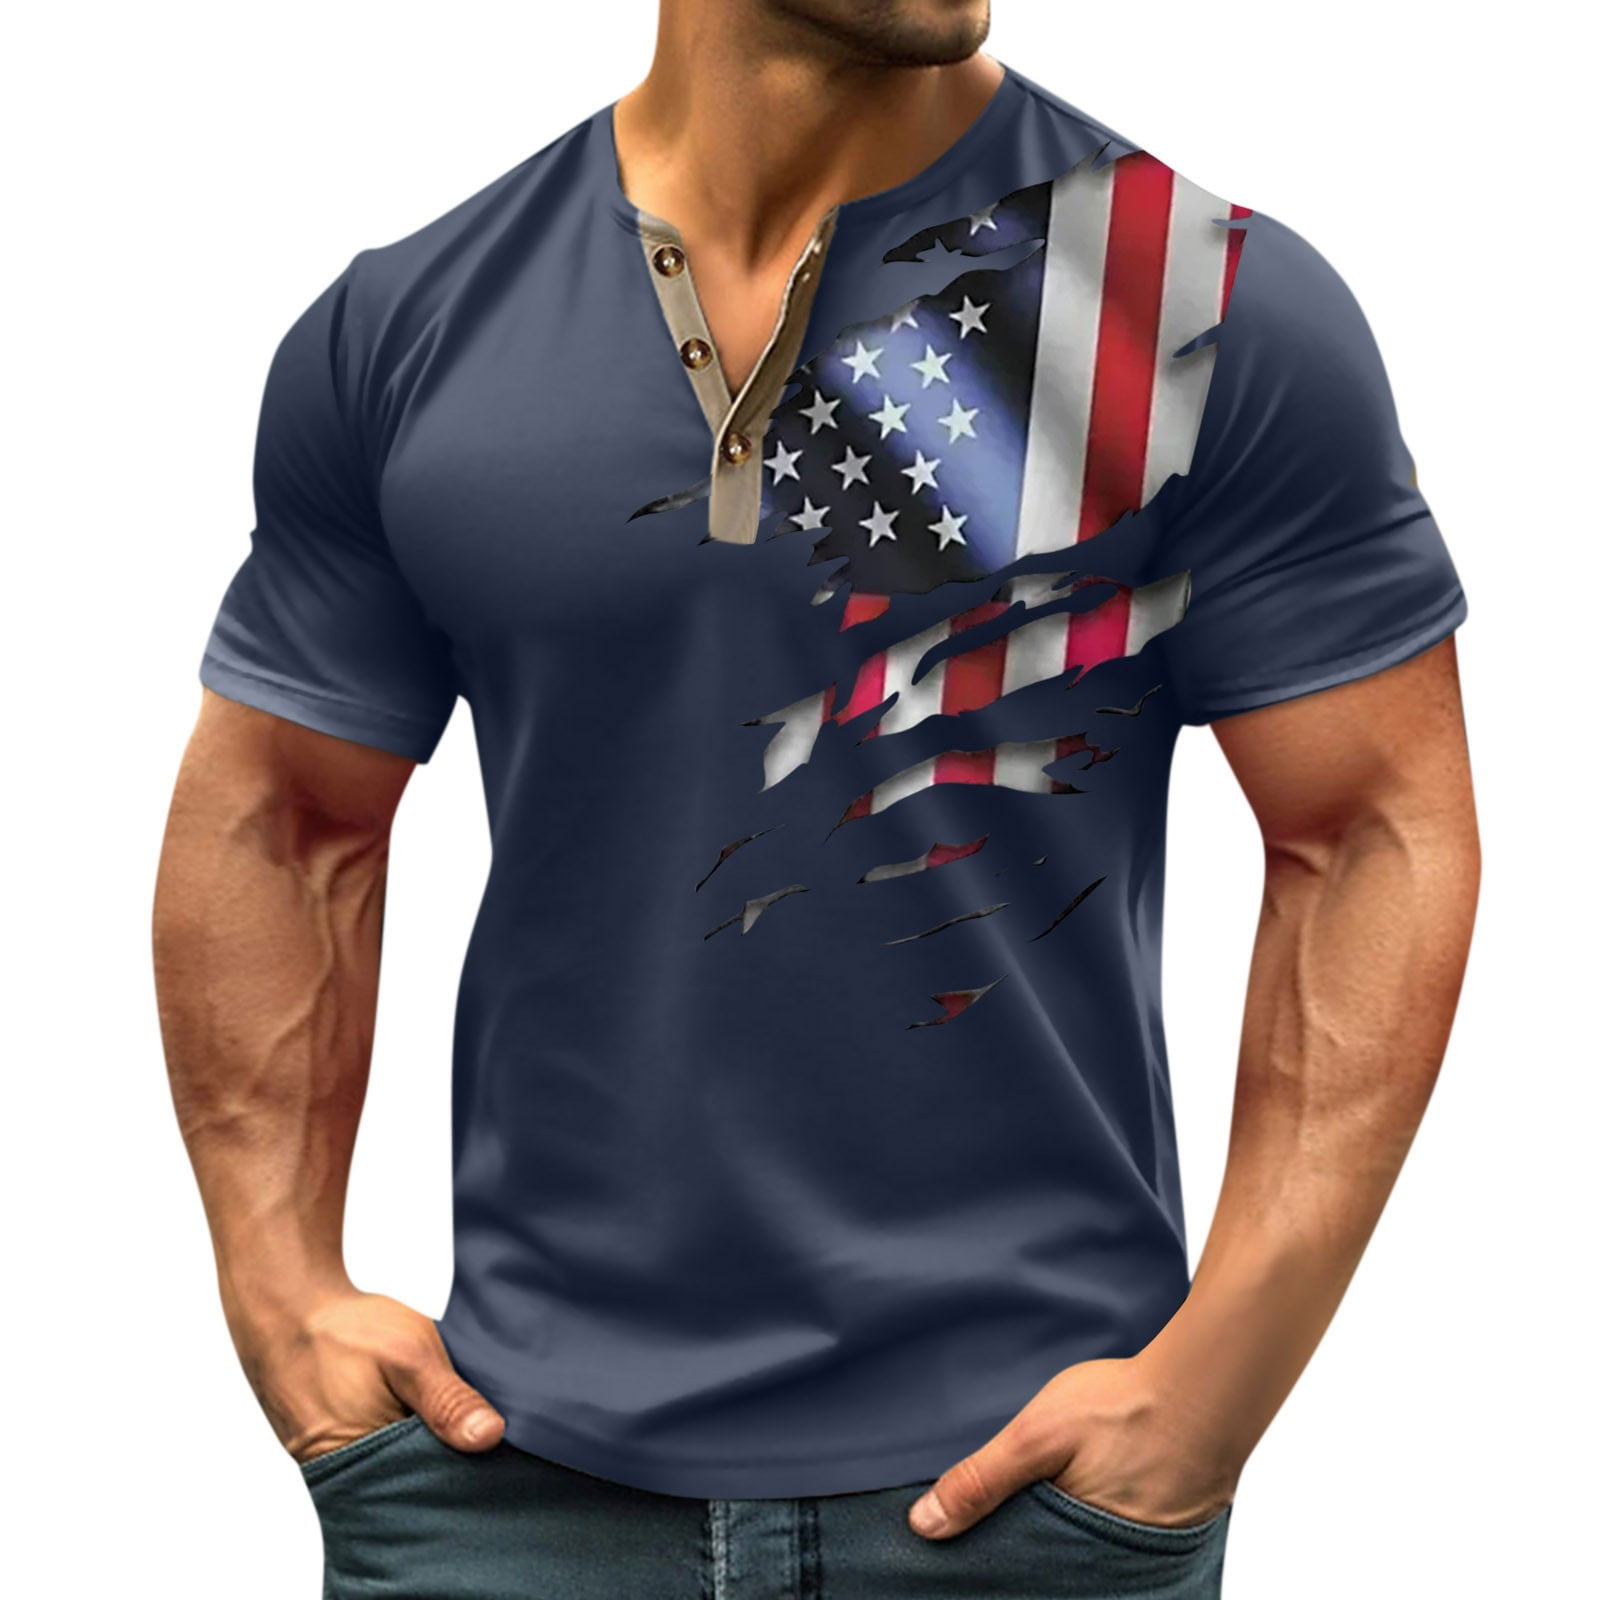 Kddylitq Patriotic Henley Shirts for Men Muscle 4th Of July Tops Button ...